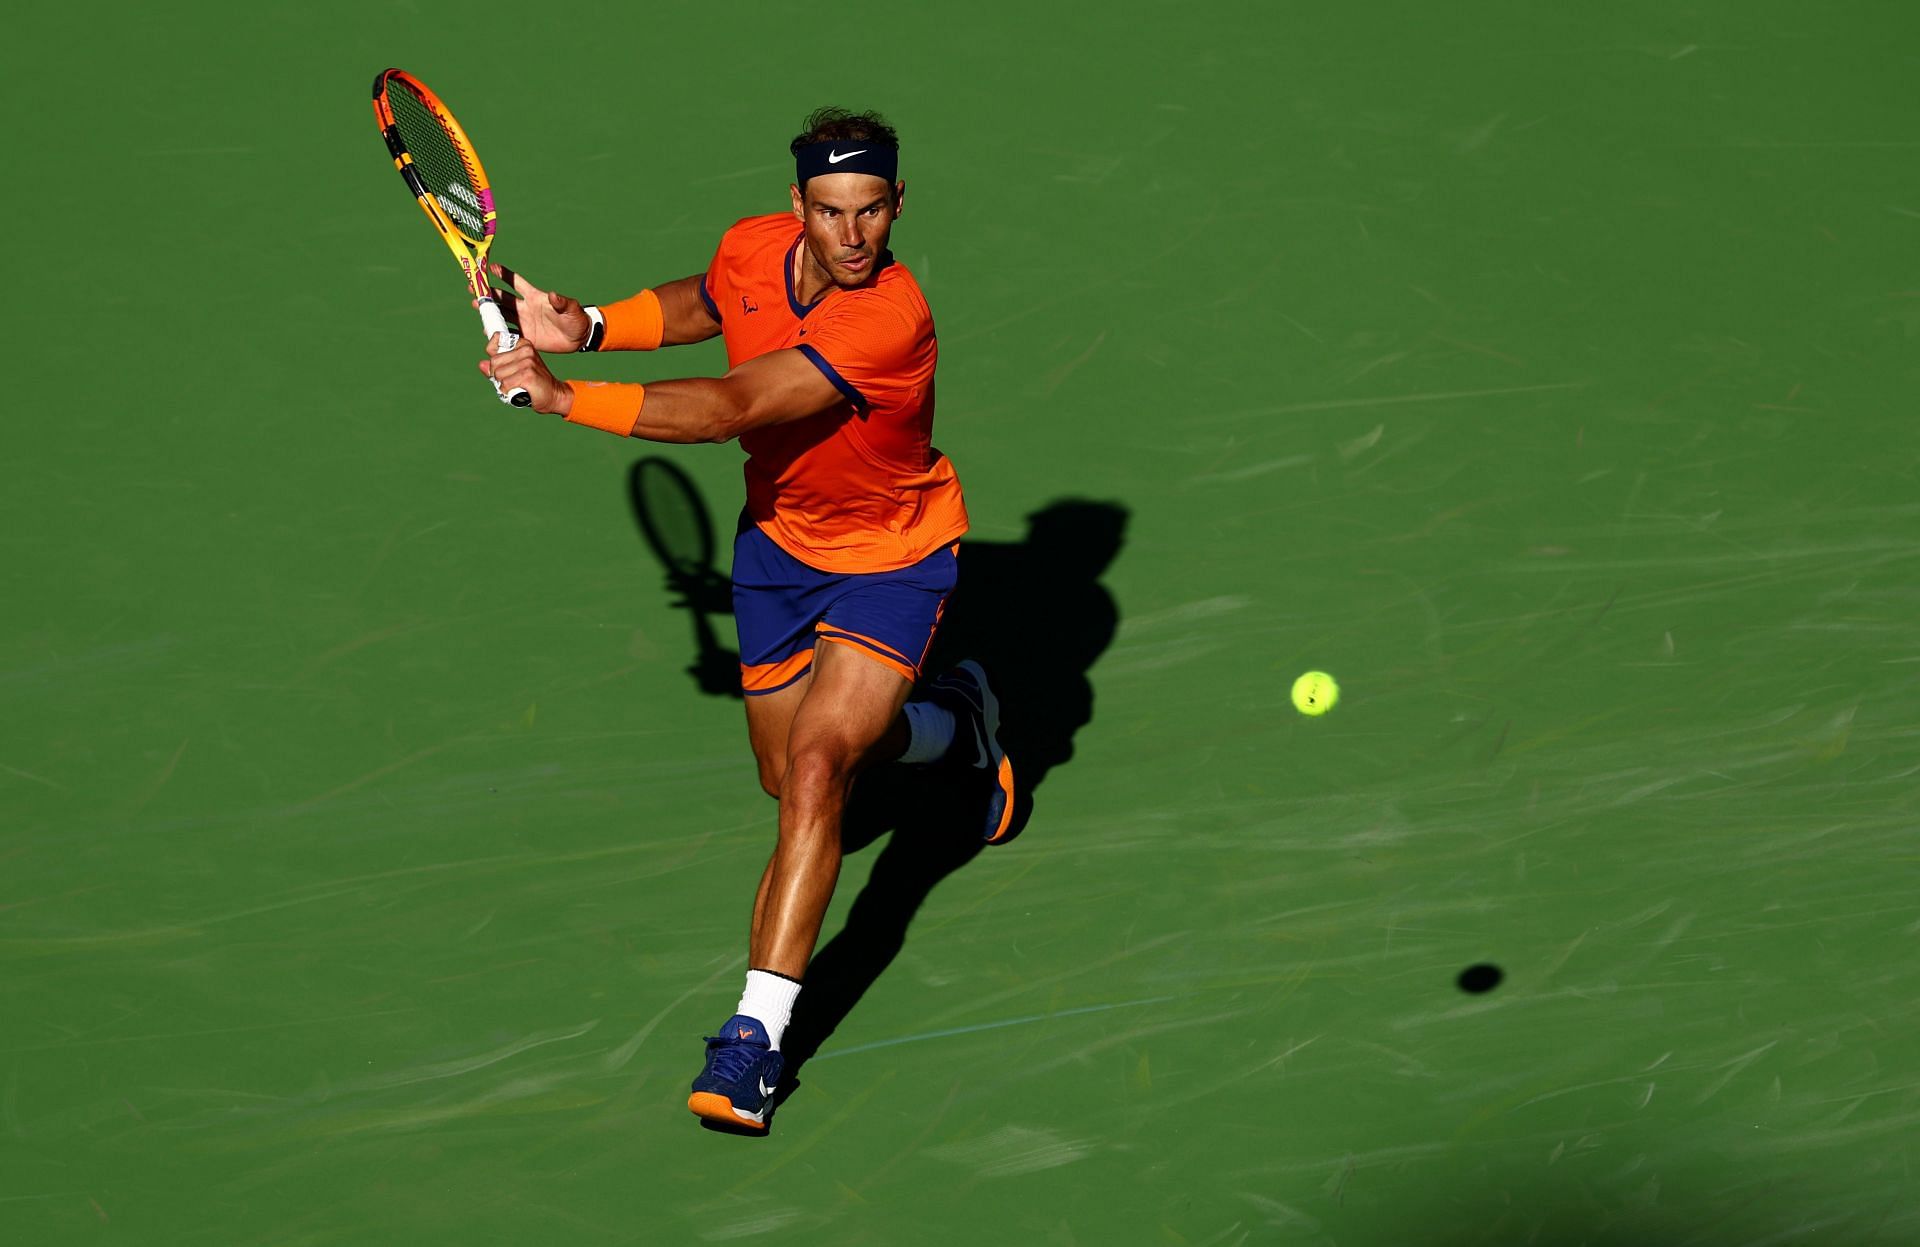 Nadal at the 2022 Indian Wells Masters